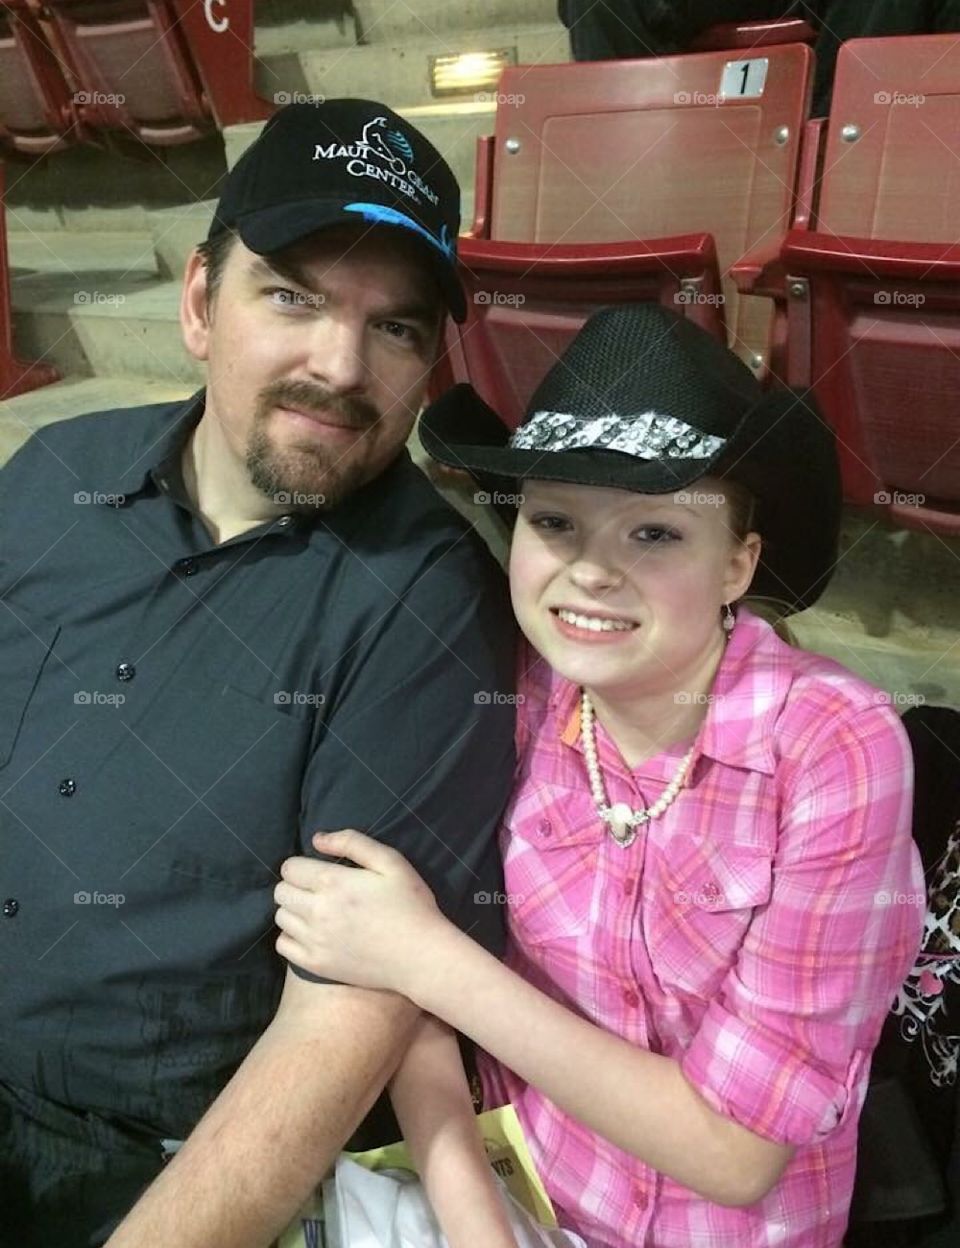 My lil’ cowgirl with her dad at the rodeo!